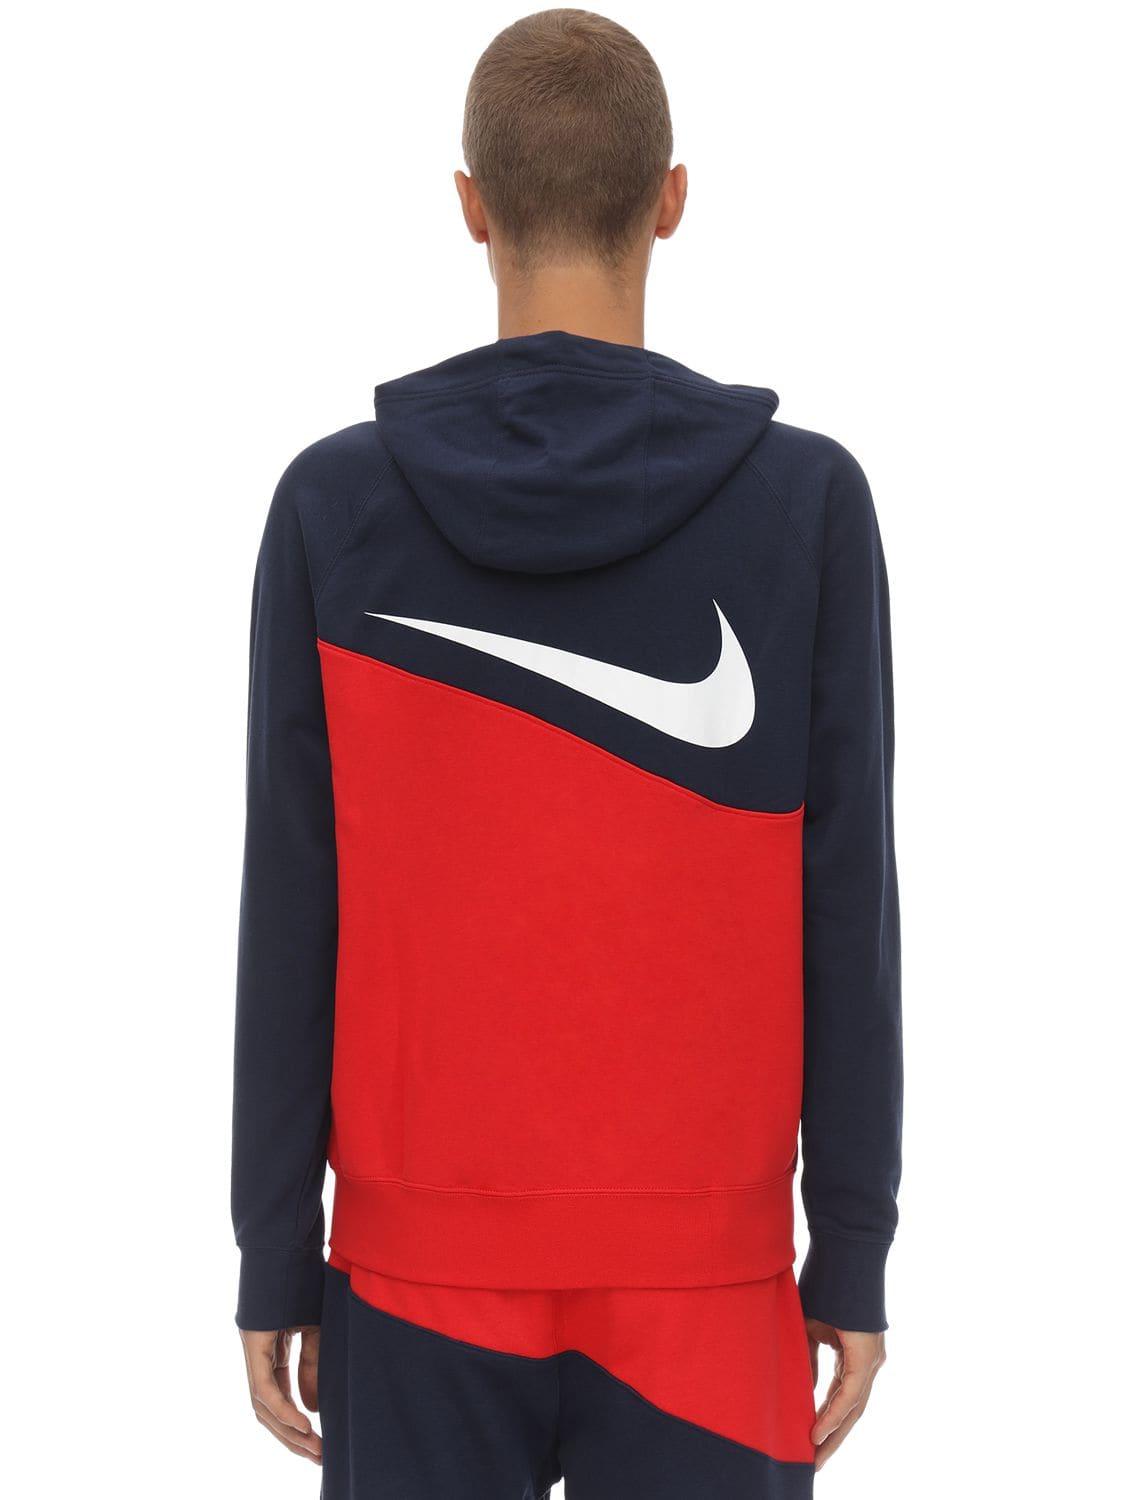 Nike Nsw Swoosh Fz Ft Cotton Blend Hoodie in Red/Navy (Blue) for 